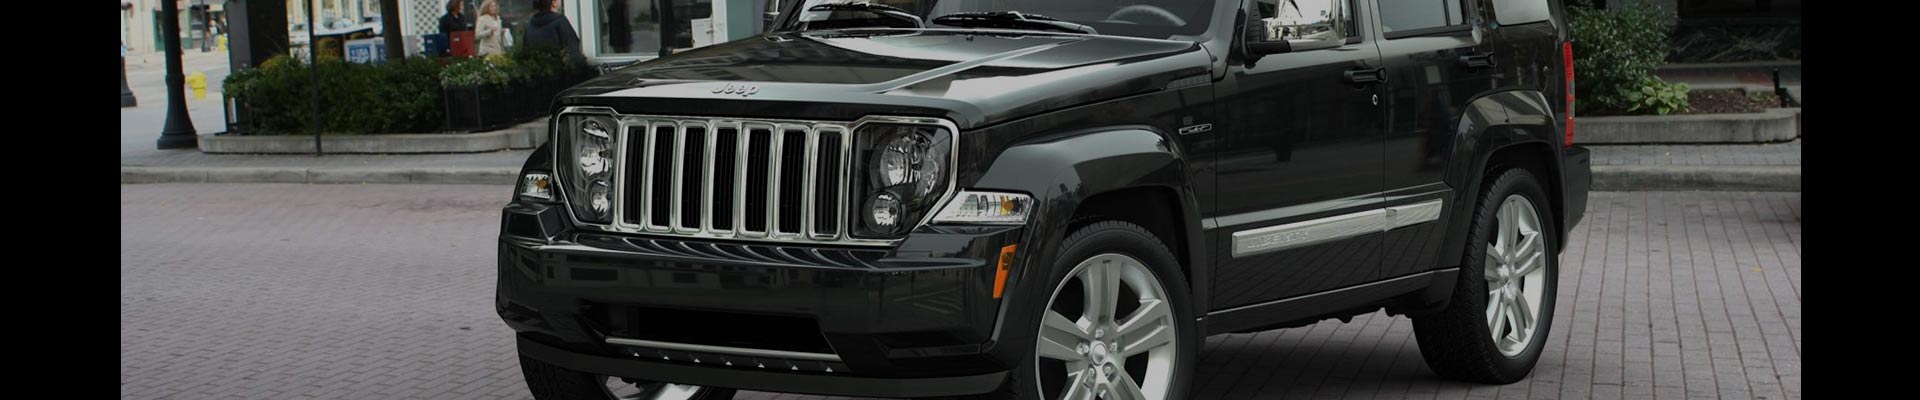 Shop Replacement and OEM 2012 Jeep Liberty Parts with Discounted Price on the Net